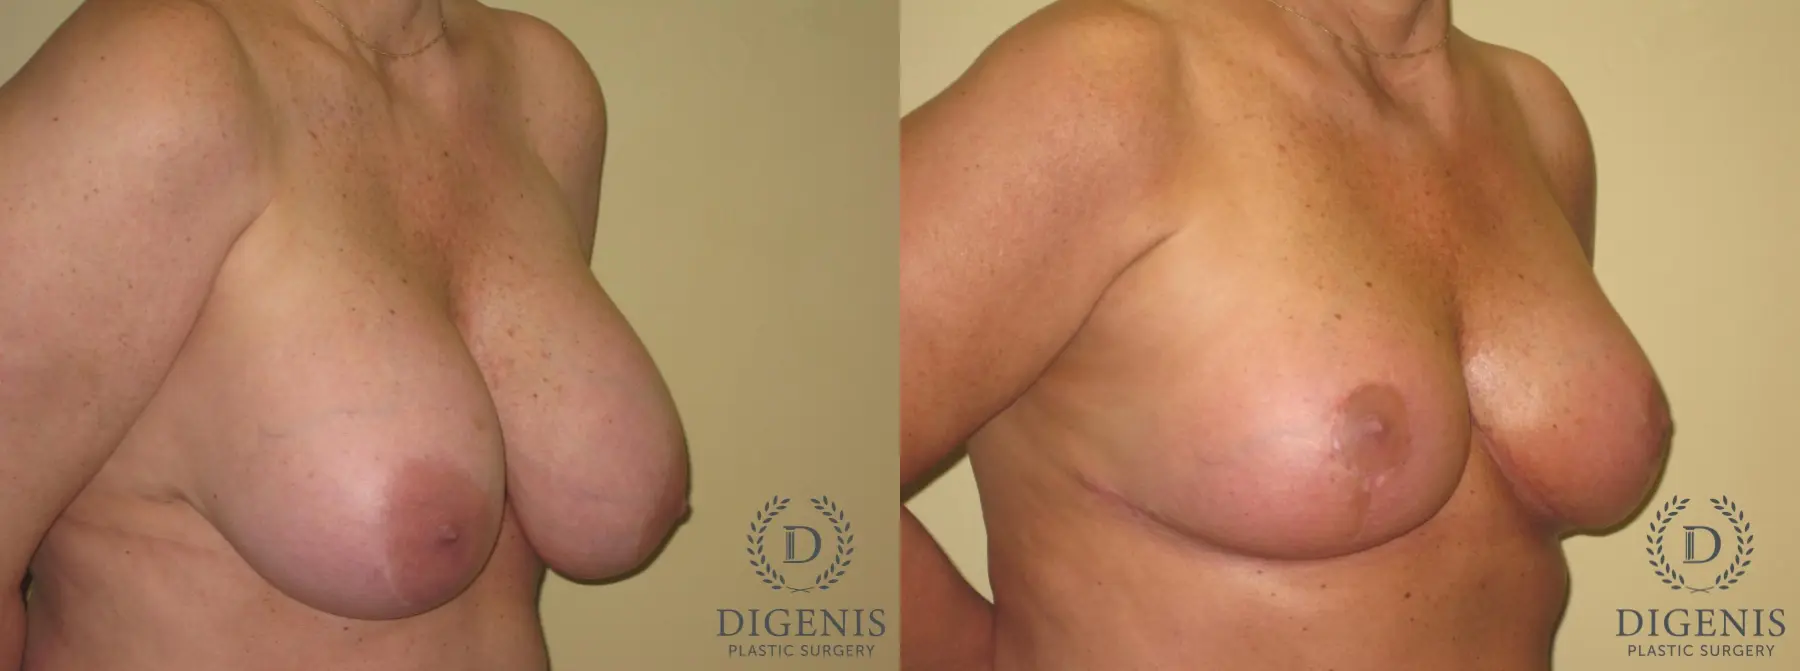 Breast Lift With Implants: Patient 7 - Before and After 2